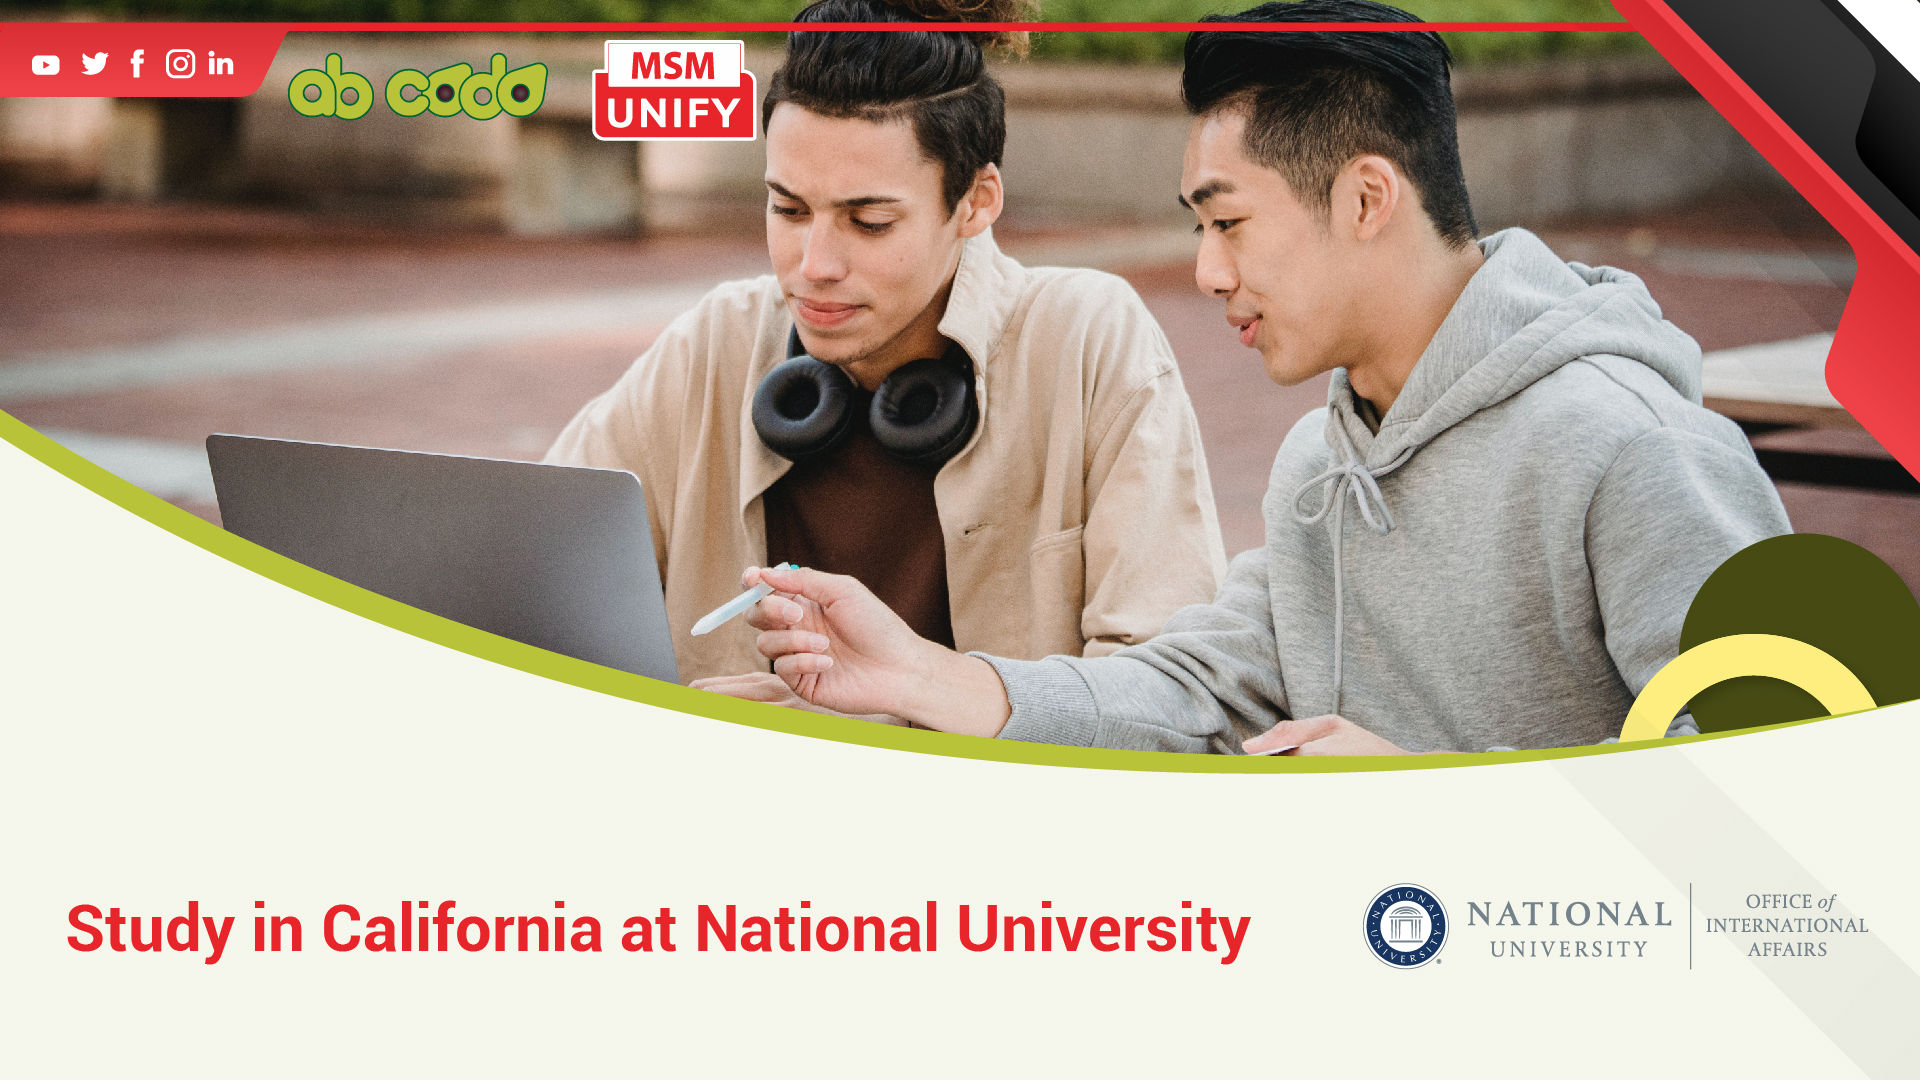 guys looking for campus to study in california